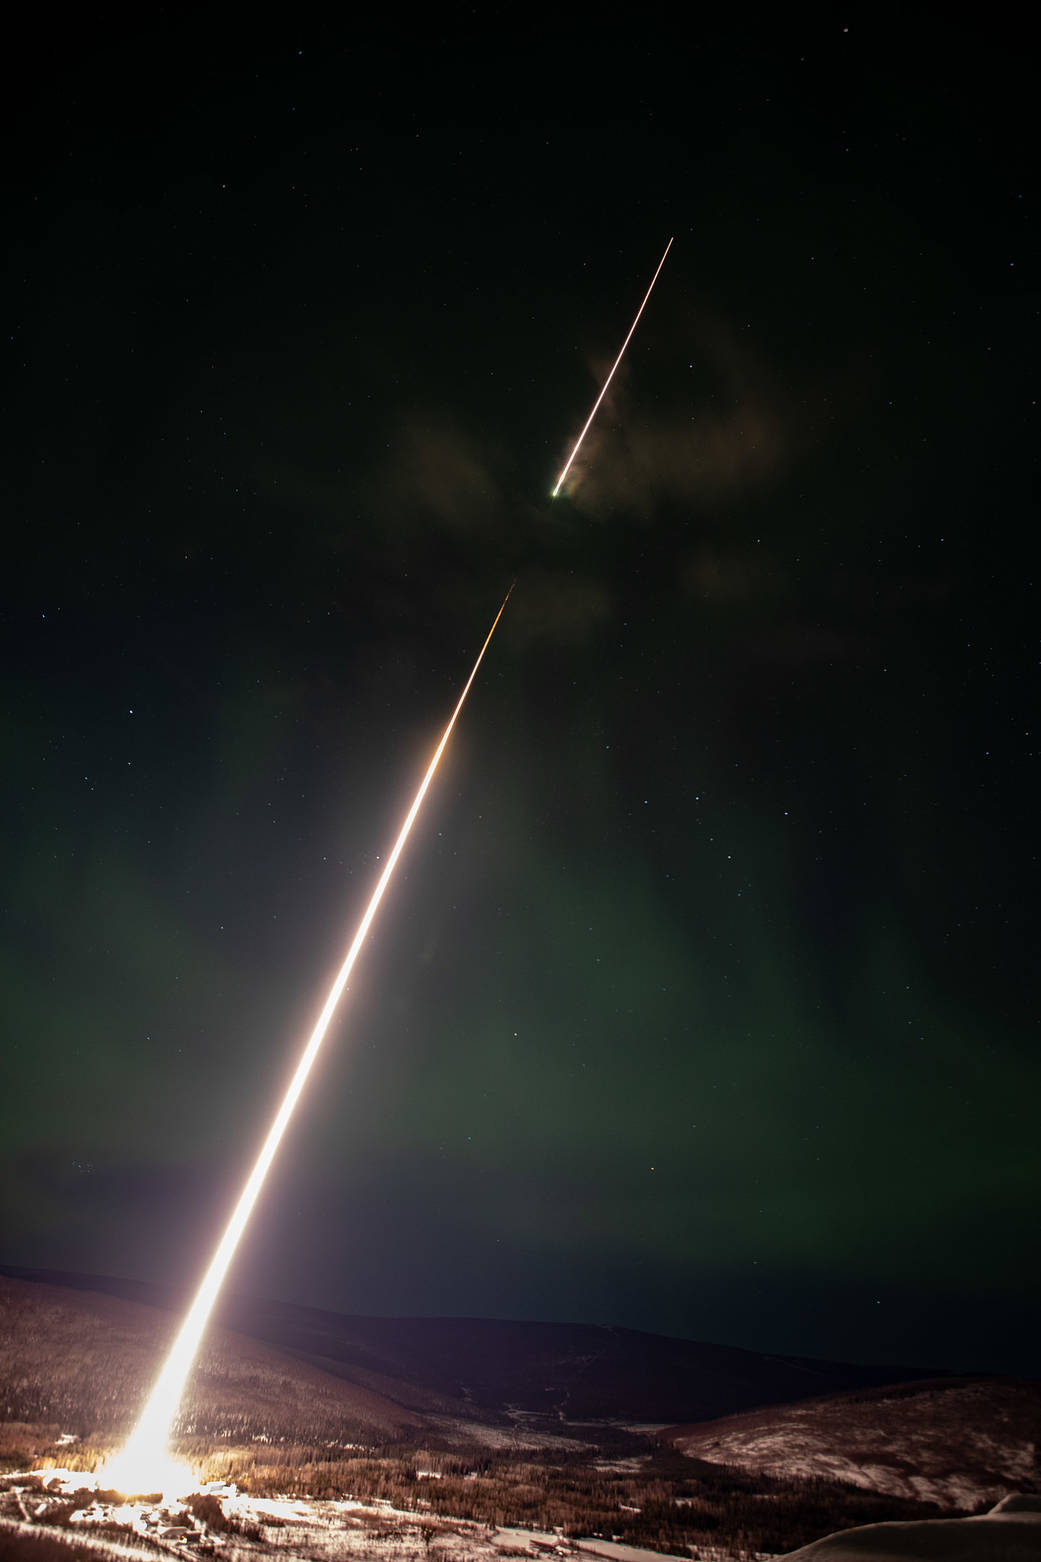 A long exposure photograph of a rocket launching into the sky. Long white streak from bottom left to top right, black sky and faint green aurora.